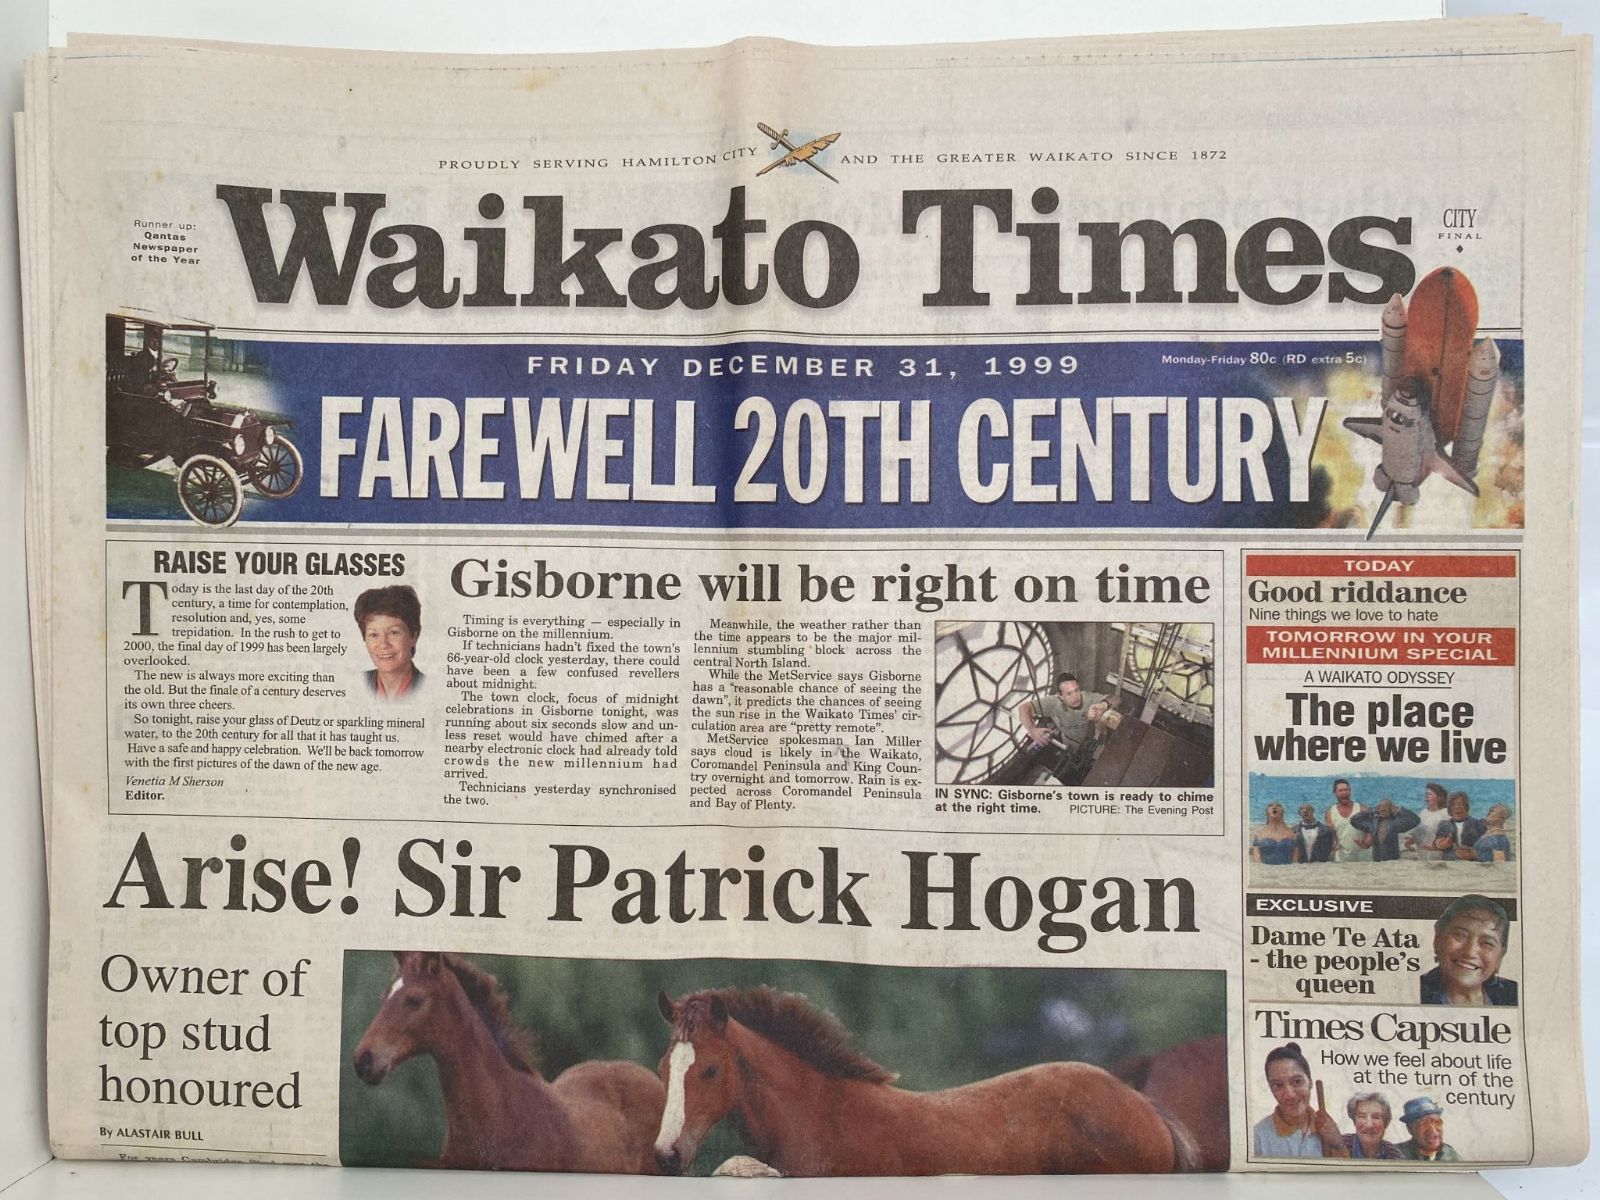 OLD NEWSPAPER: Waikato Times - Farewell 20th Century - 31 December 1999